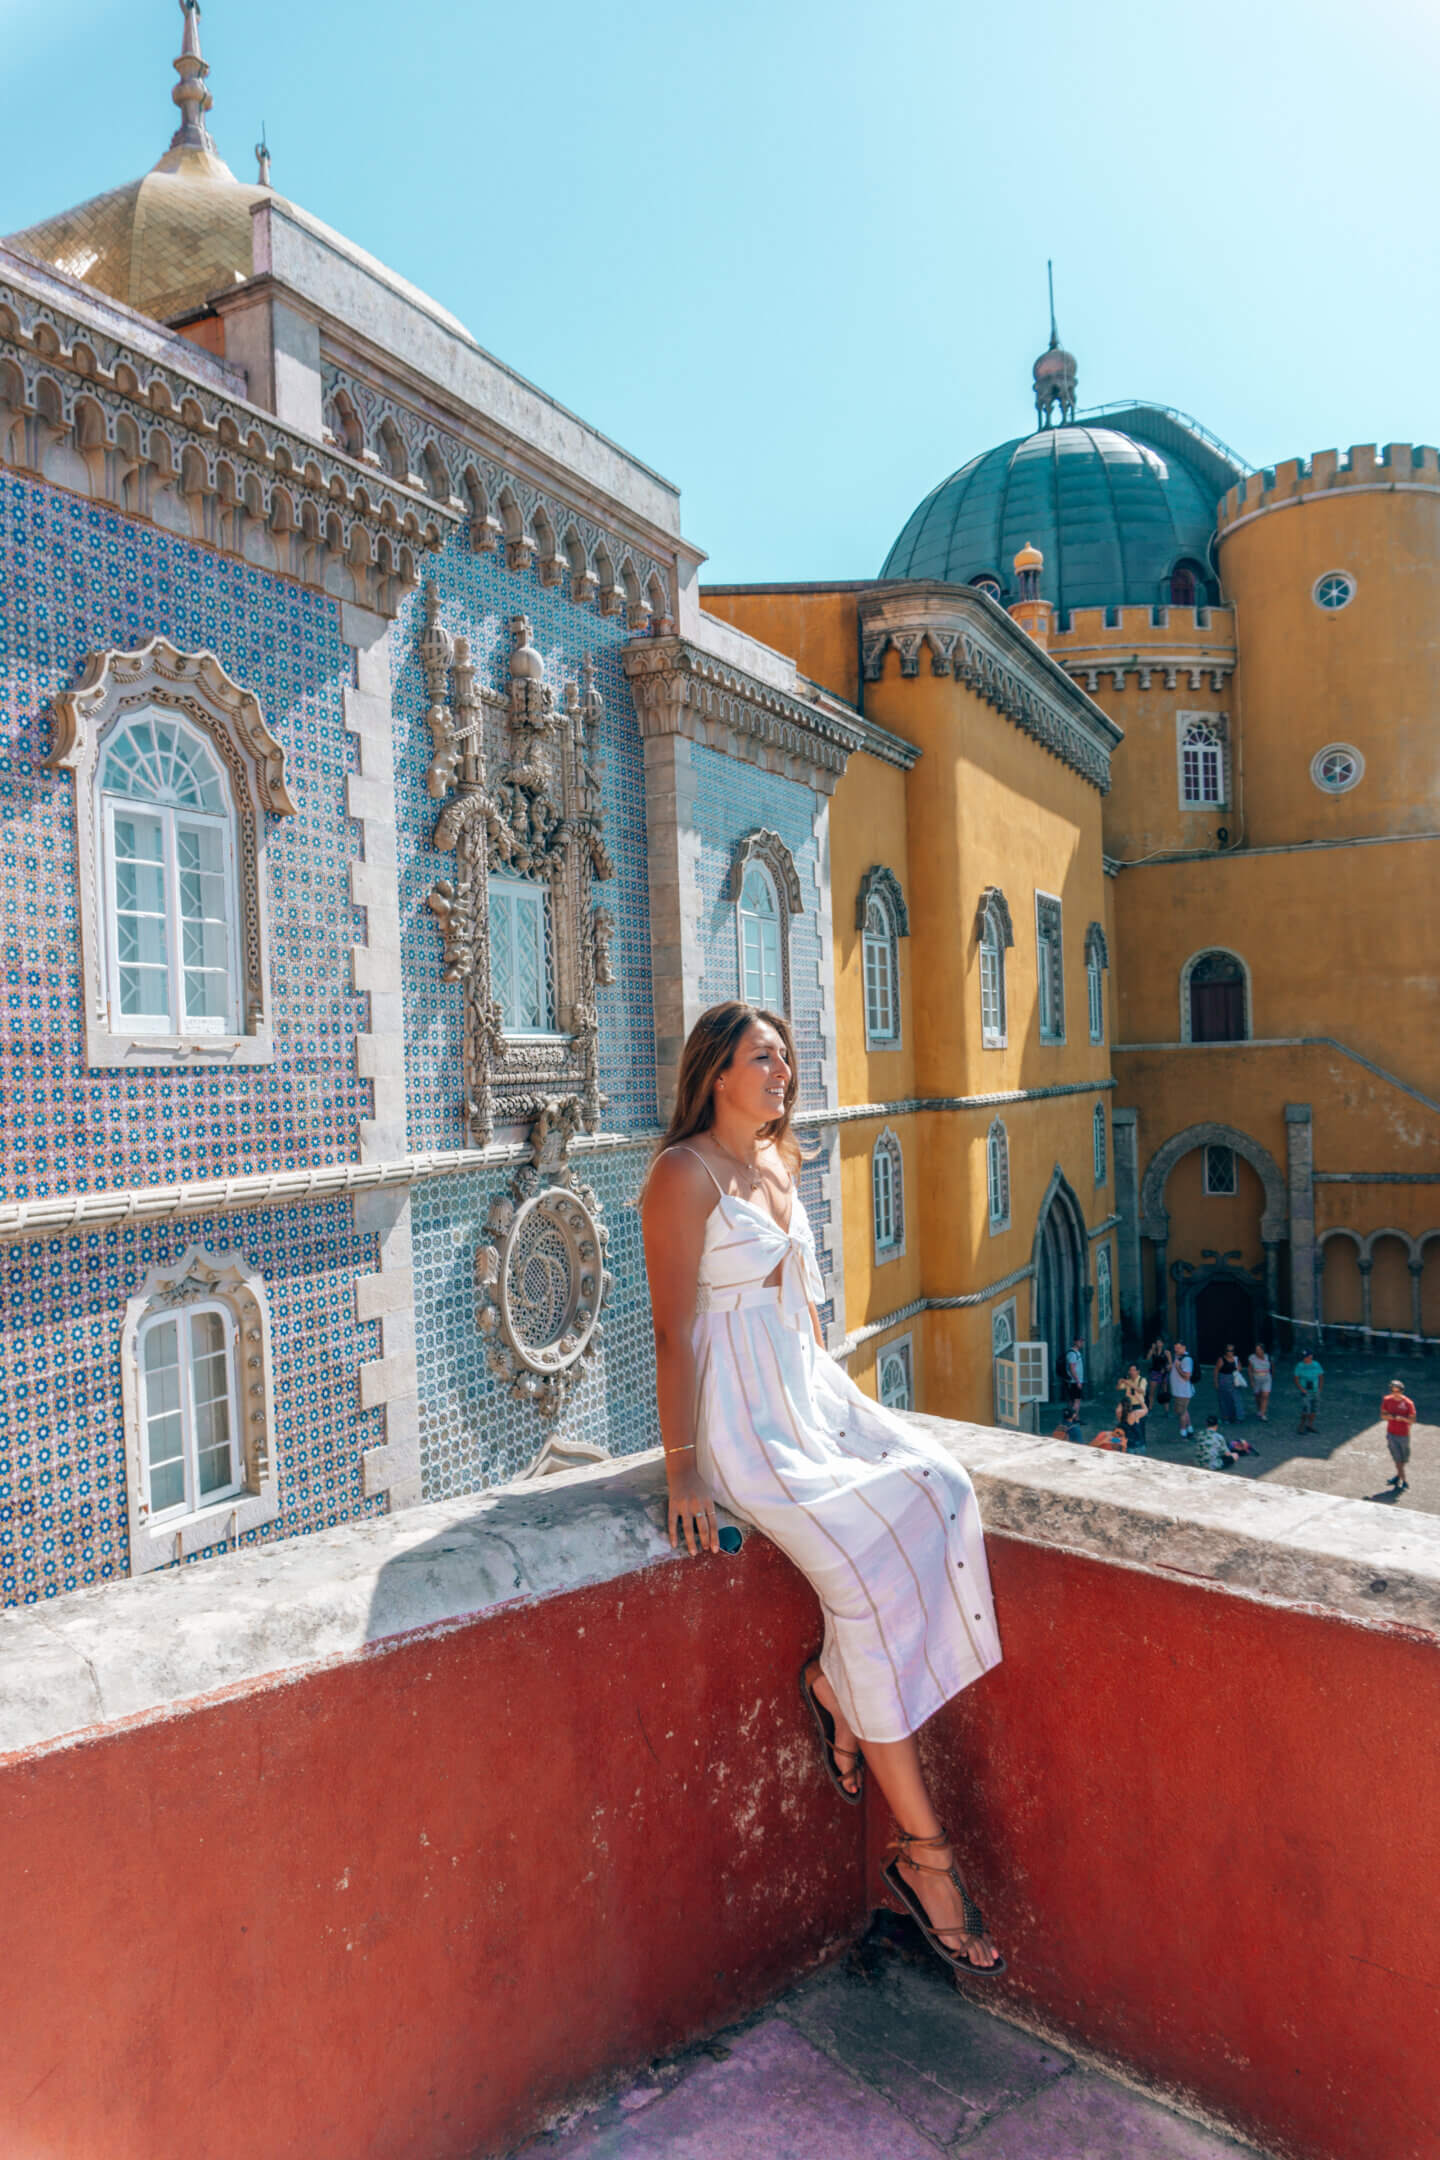 A girl sits on a ledge in front of Pena Palace, in Sintra, Portugal